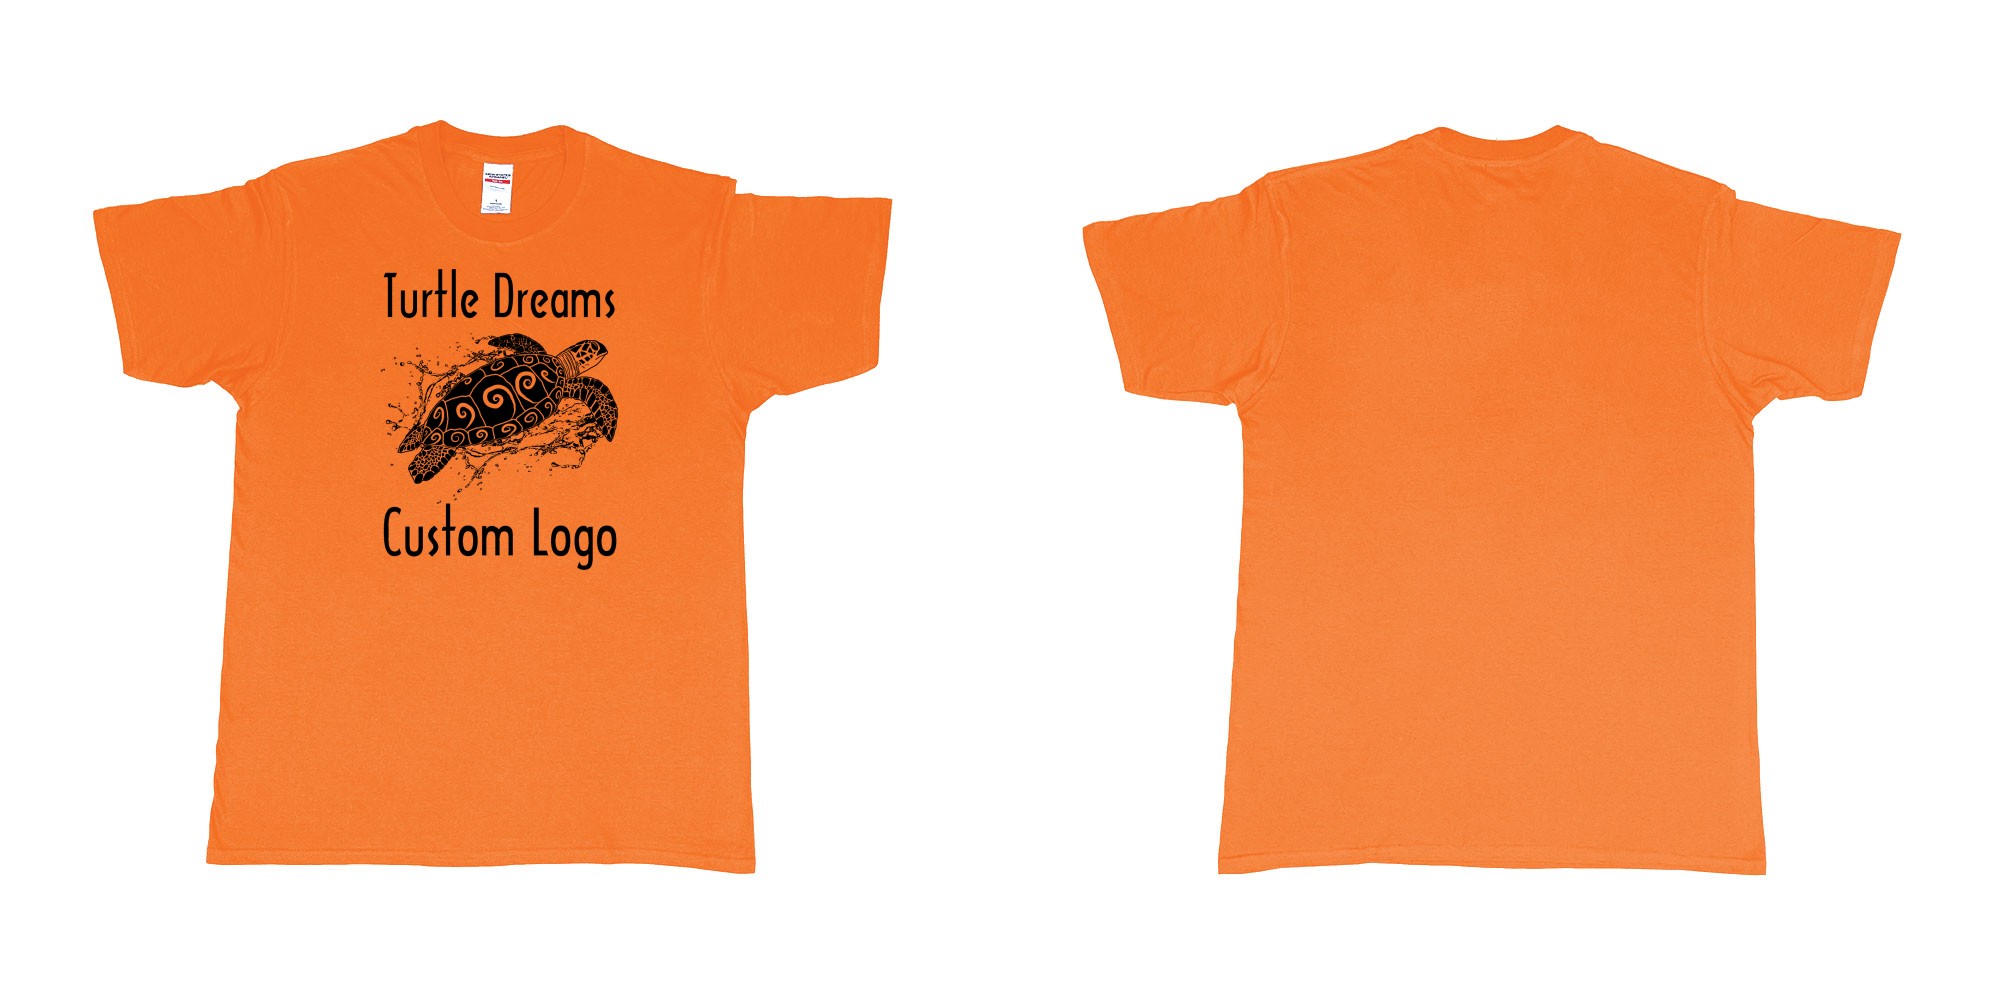 Custom tshirt design turtle dreams custom logo design in fabric color orange choice your own text made in Bali by The Pirate Way